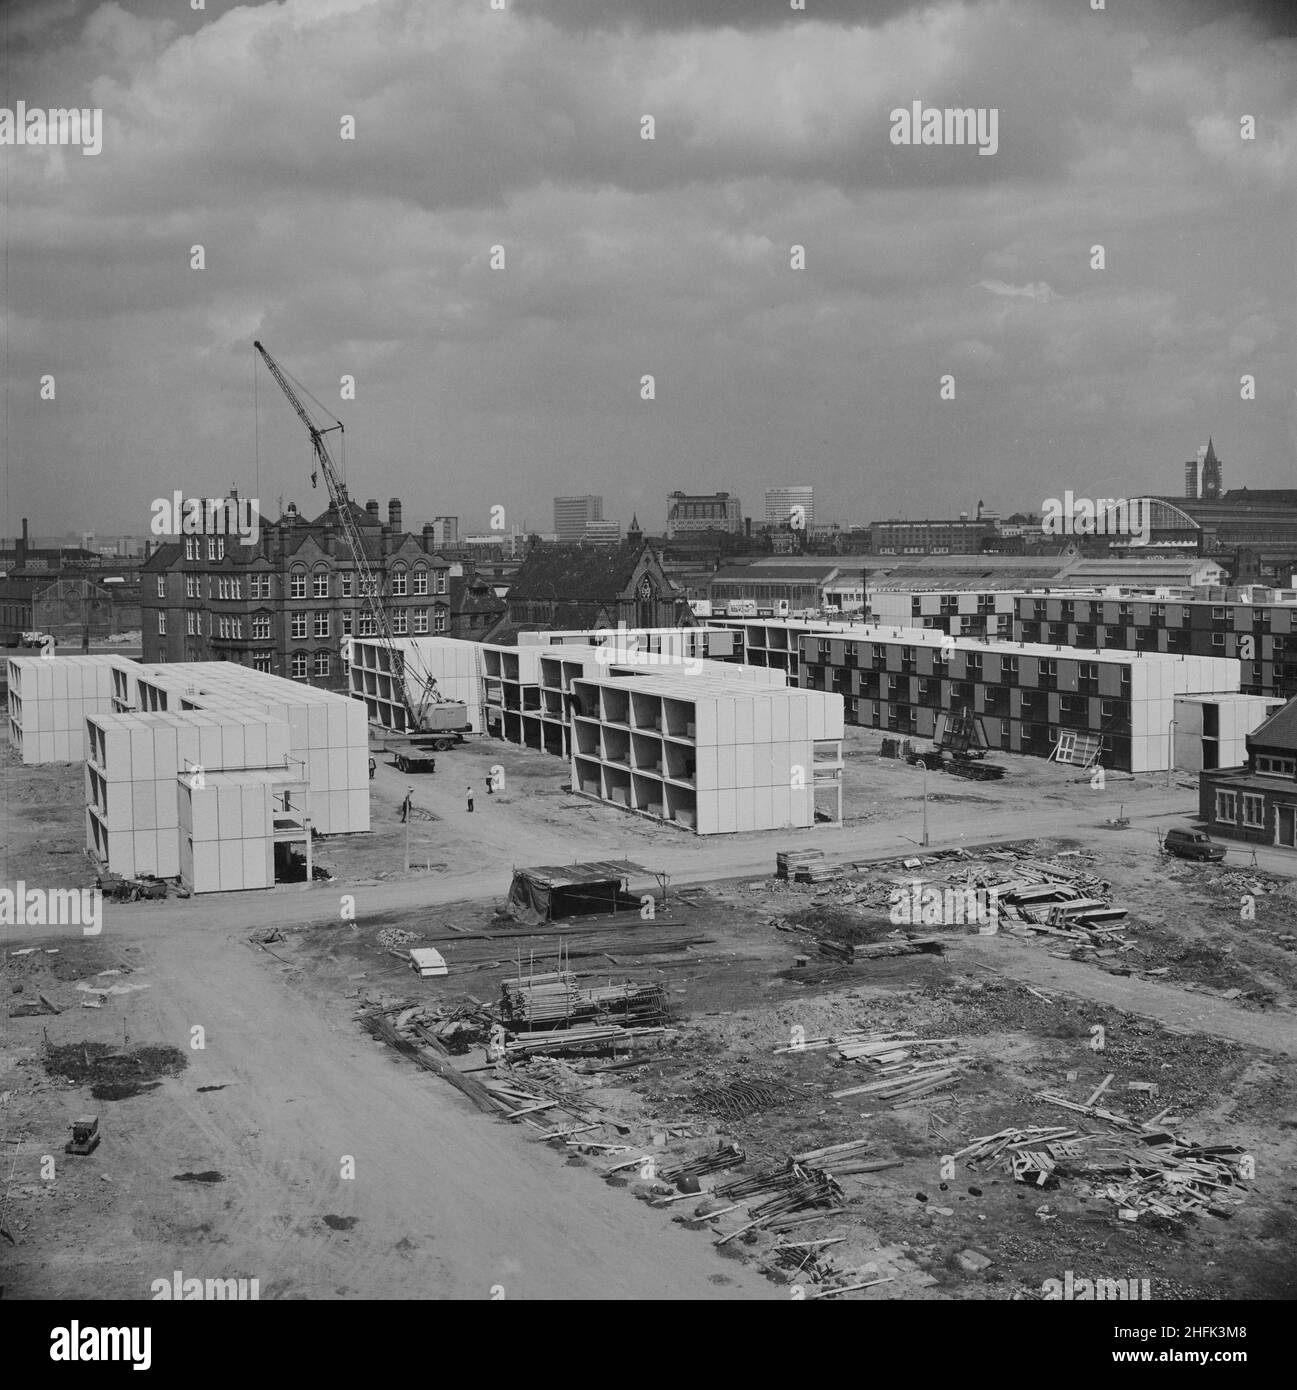 Hulme, Manchester, 04/05/1967. A view over the construction site of three-storey flats in Hulme, built using the 12M Jespersen system, with the Manchester skyline in the distance including Manchester Central Railway Station. In 1963, John Laing and Son Ltd bought the rights to the Danish industrialised building system known as Jespersen (sometimes referred to as Jesperson). The company built factories in Scotland, Hampshire and Lancashire producing Jespersen prefabricated parts and precast concrete panels, allowing the building of housing to be rationalised, saving time and money. These flats Stock Photo